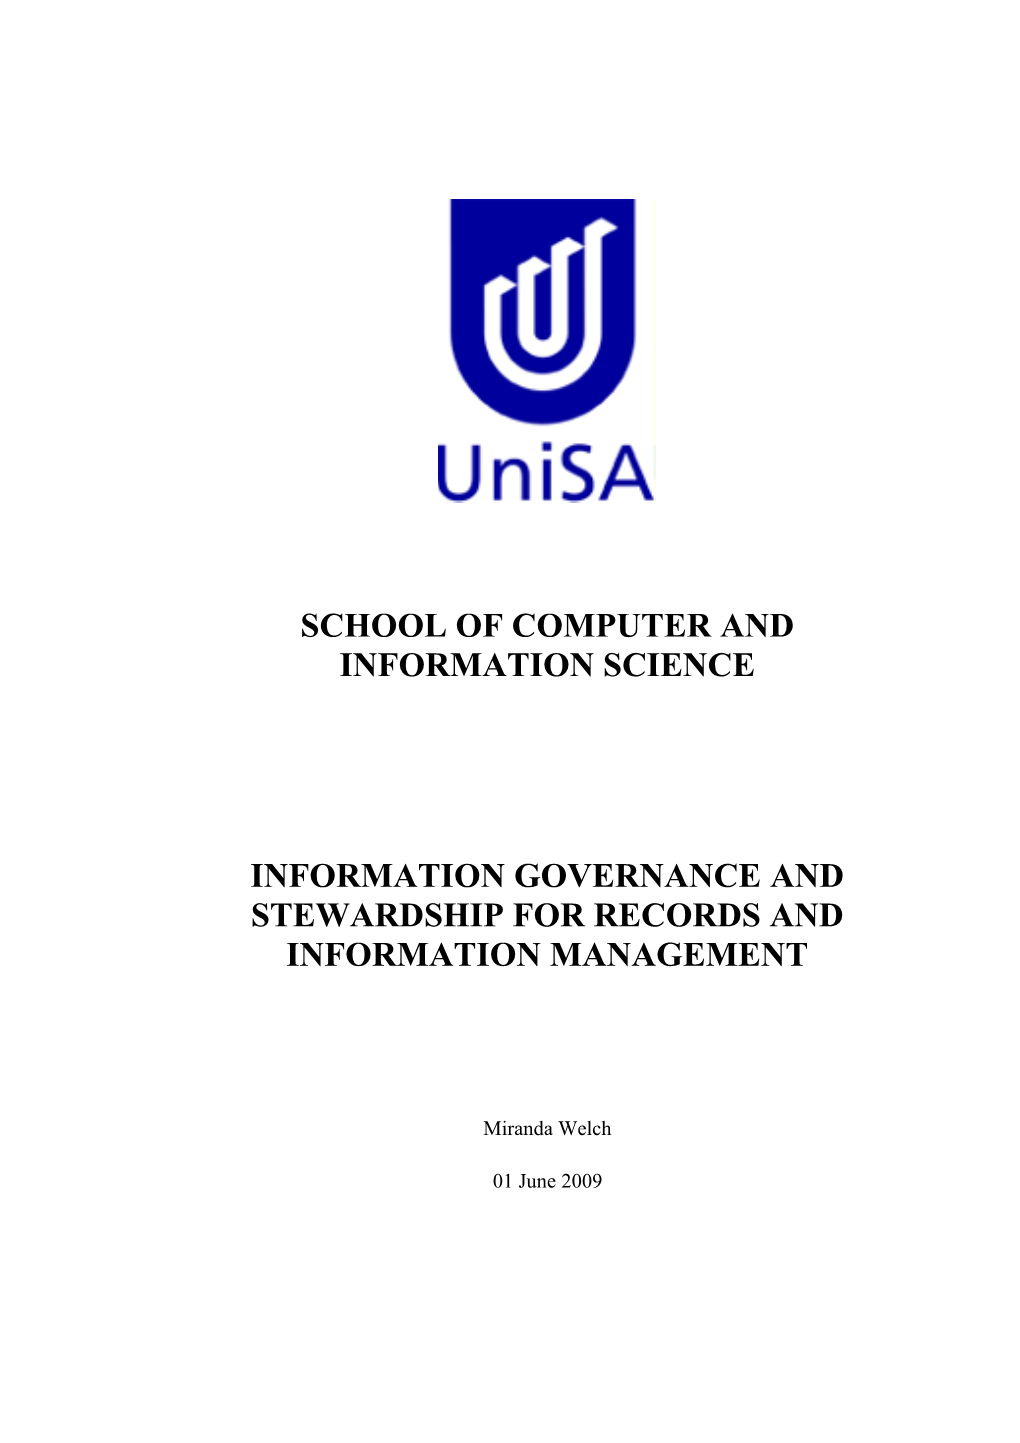 Information Governance and Stewardship for Records and Information Management